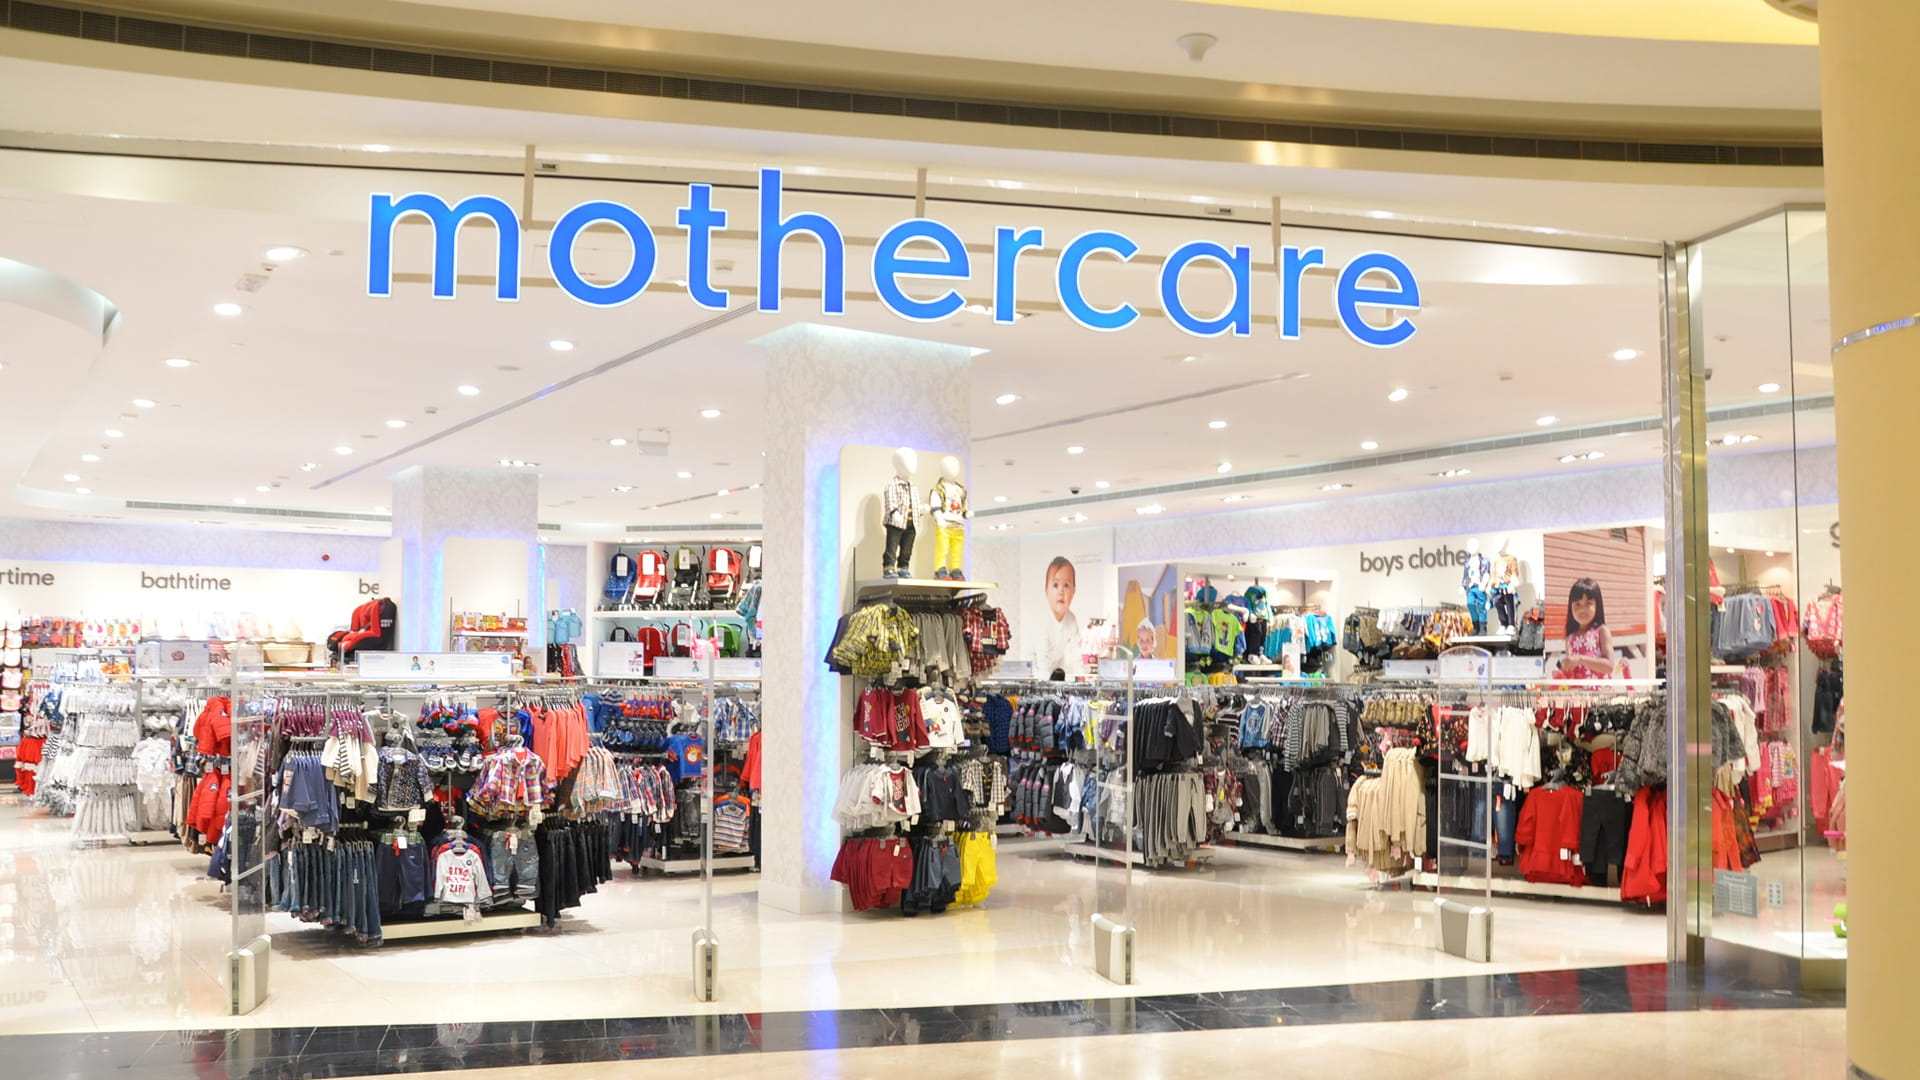 Mothercare Store - Mothercare Stores , HD Wallpaper & Backgrounds